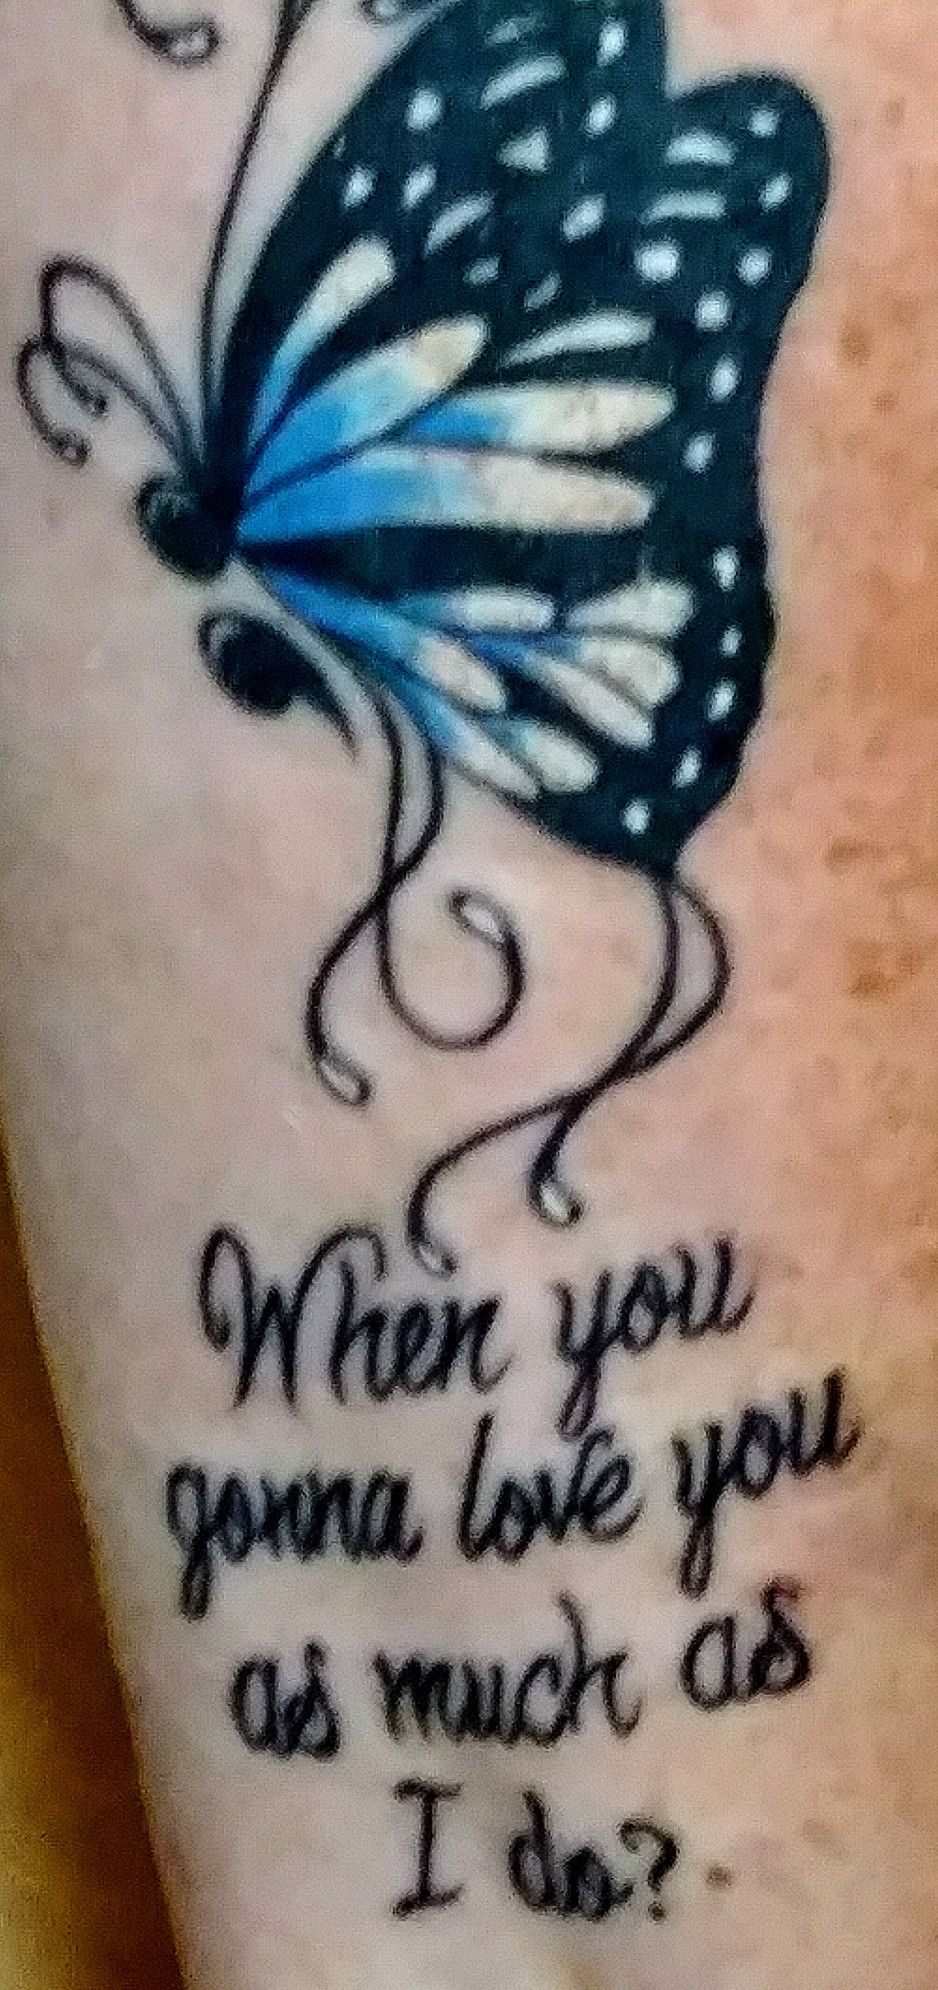 Semicolon Butterfly Tattoo With Lyrics From Winter Tori Amos intended for measurements 938 X 1990